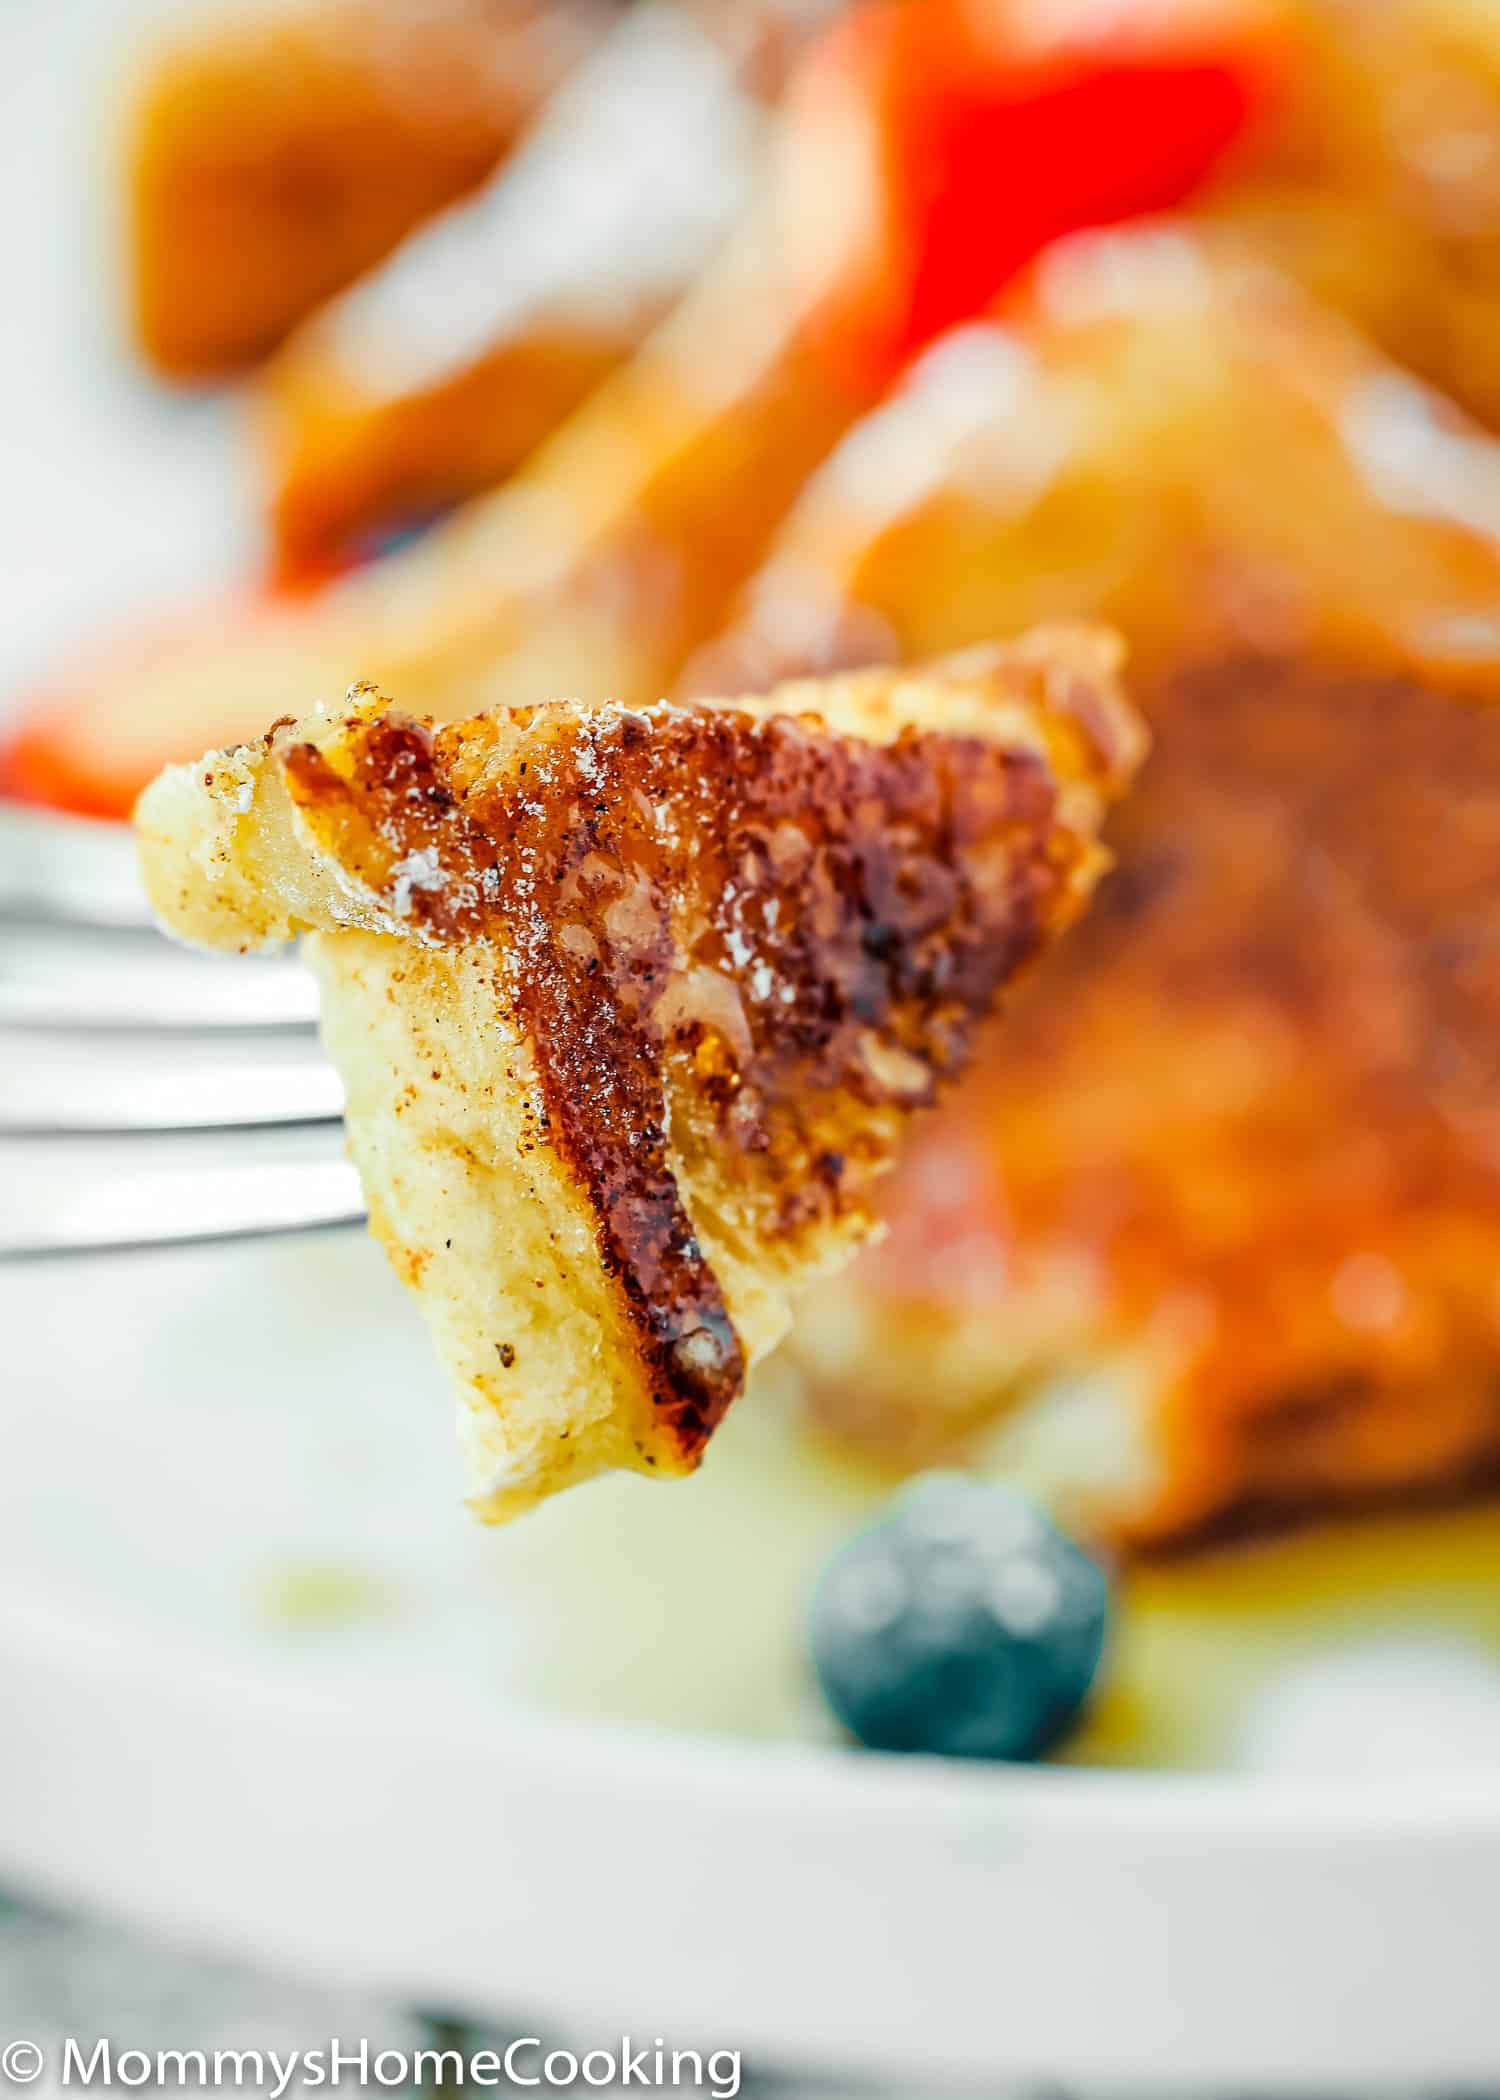 A fork with a bite-sized piece of French toast on it.